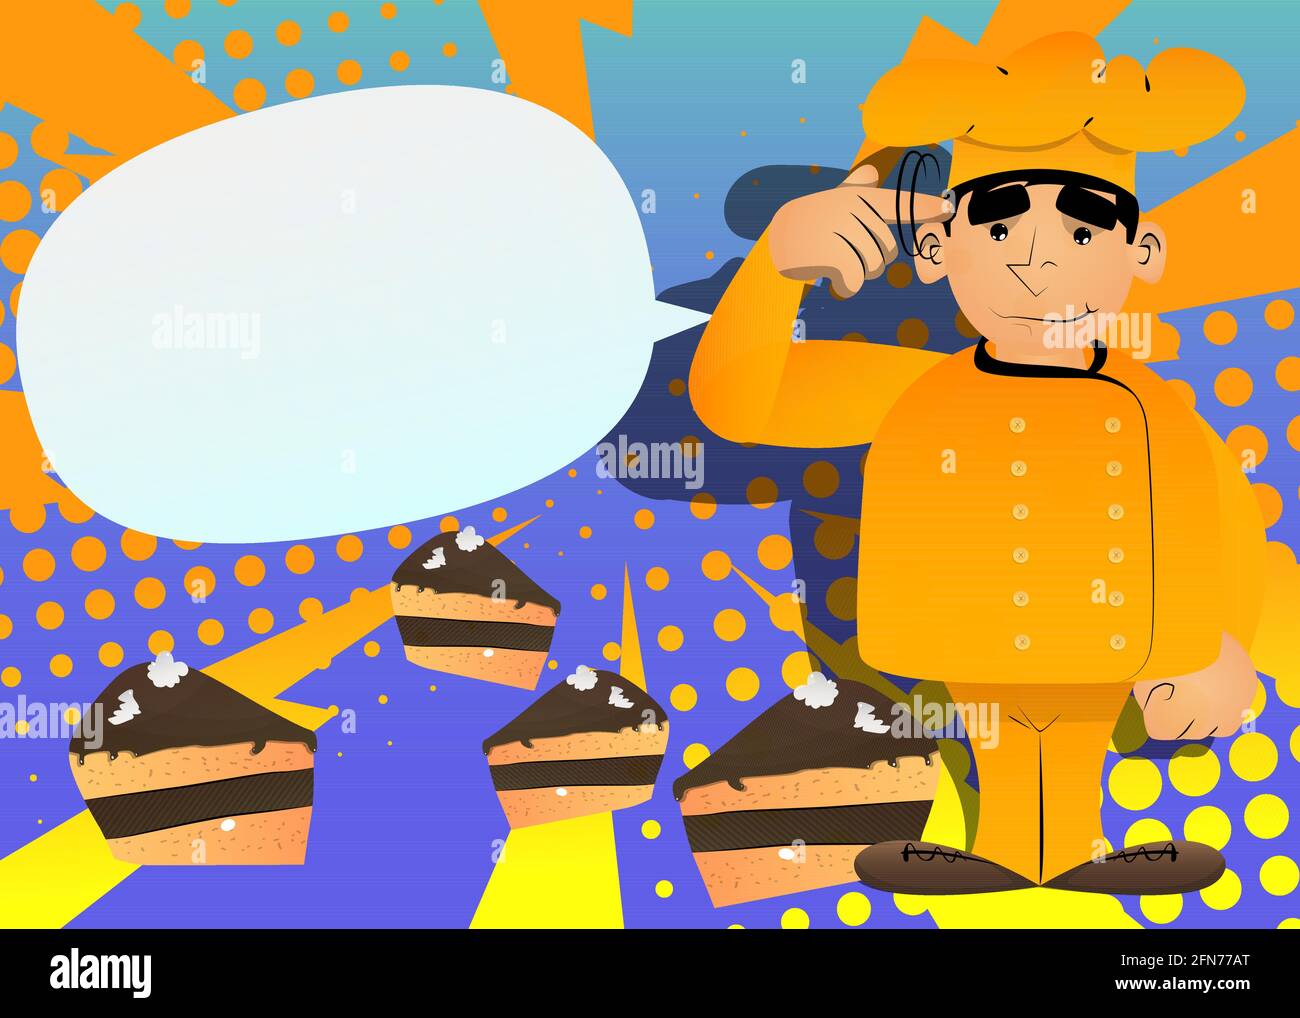 Fat male cartoon chef in uniform shows a you're nuts gesture by twisting his finger around his temple. Vector illustration. Stock Vector